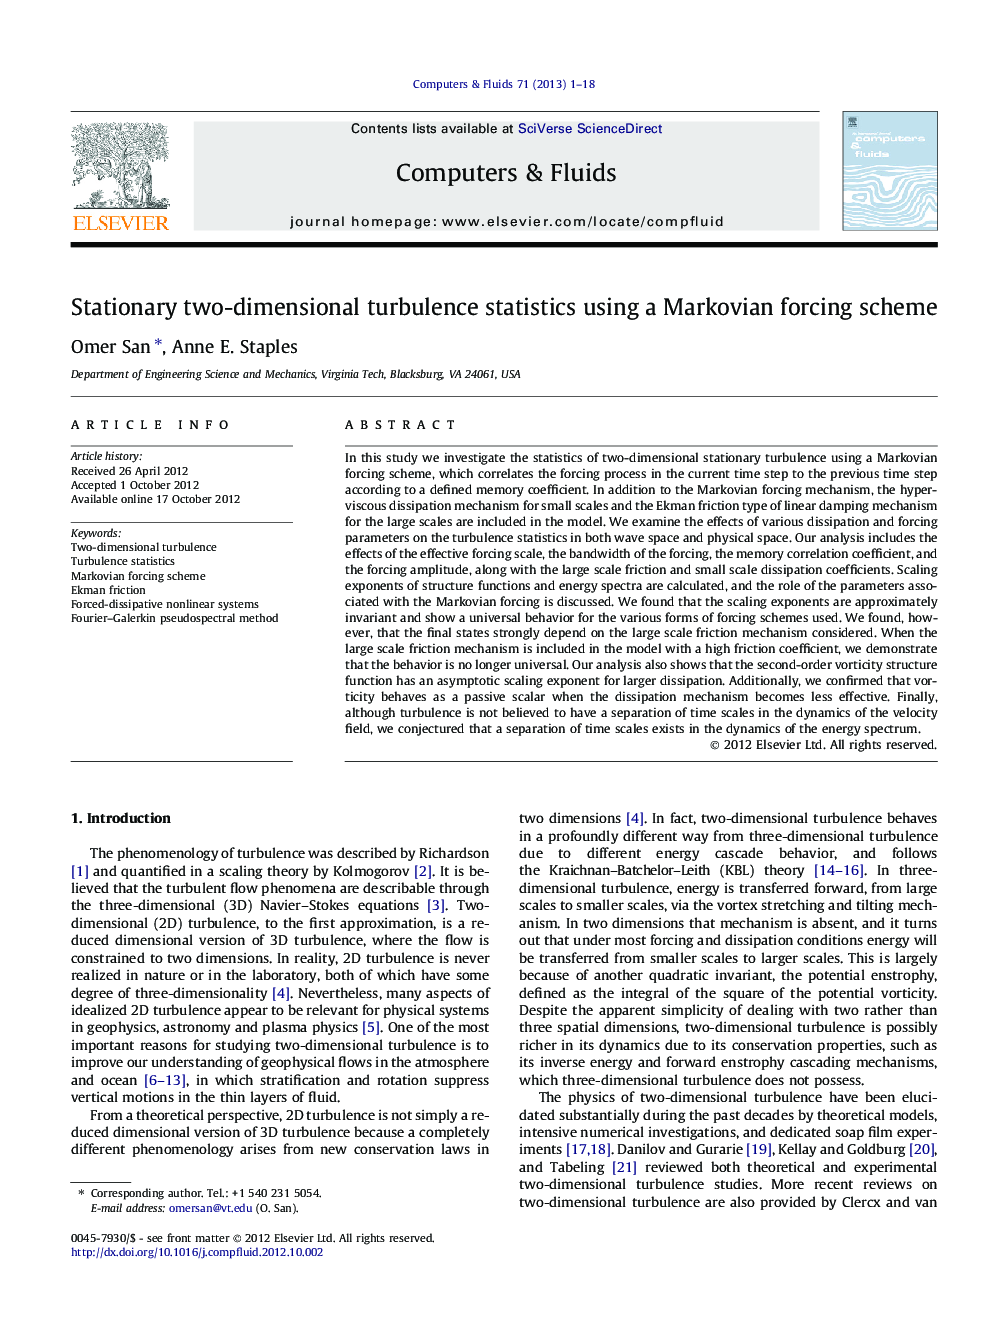 Stationary two-dimensional turbulence statistics using a Markovian forcing scheme